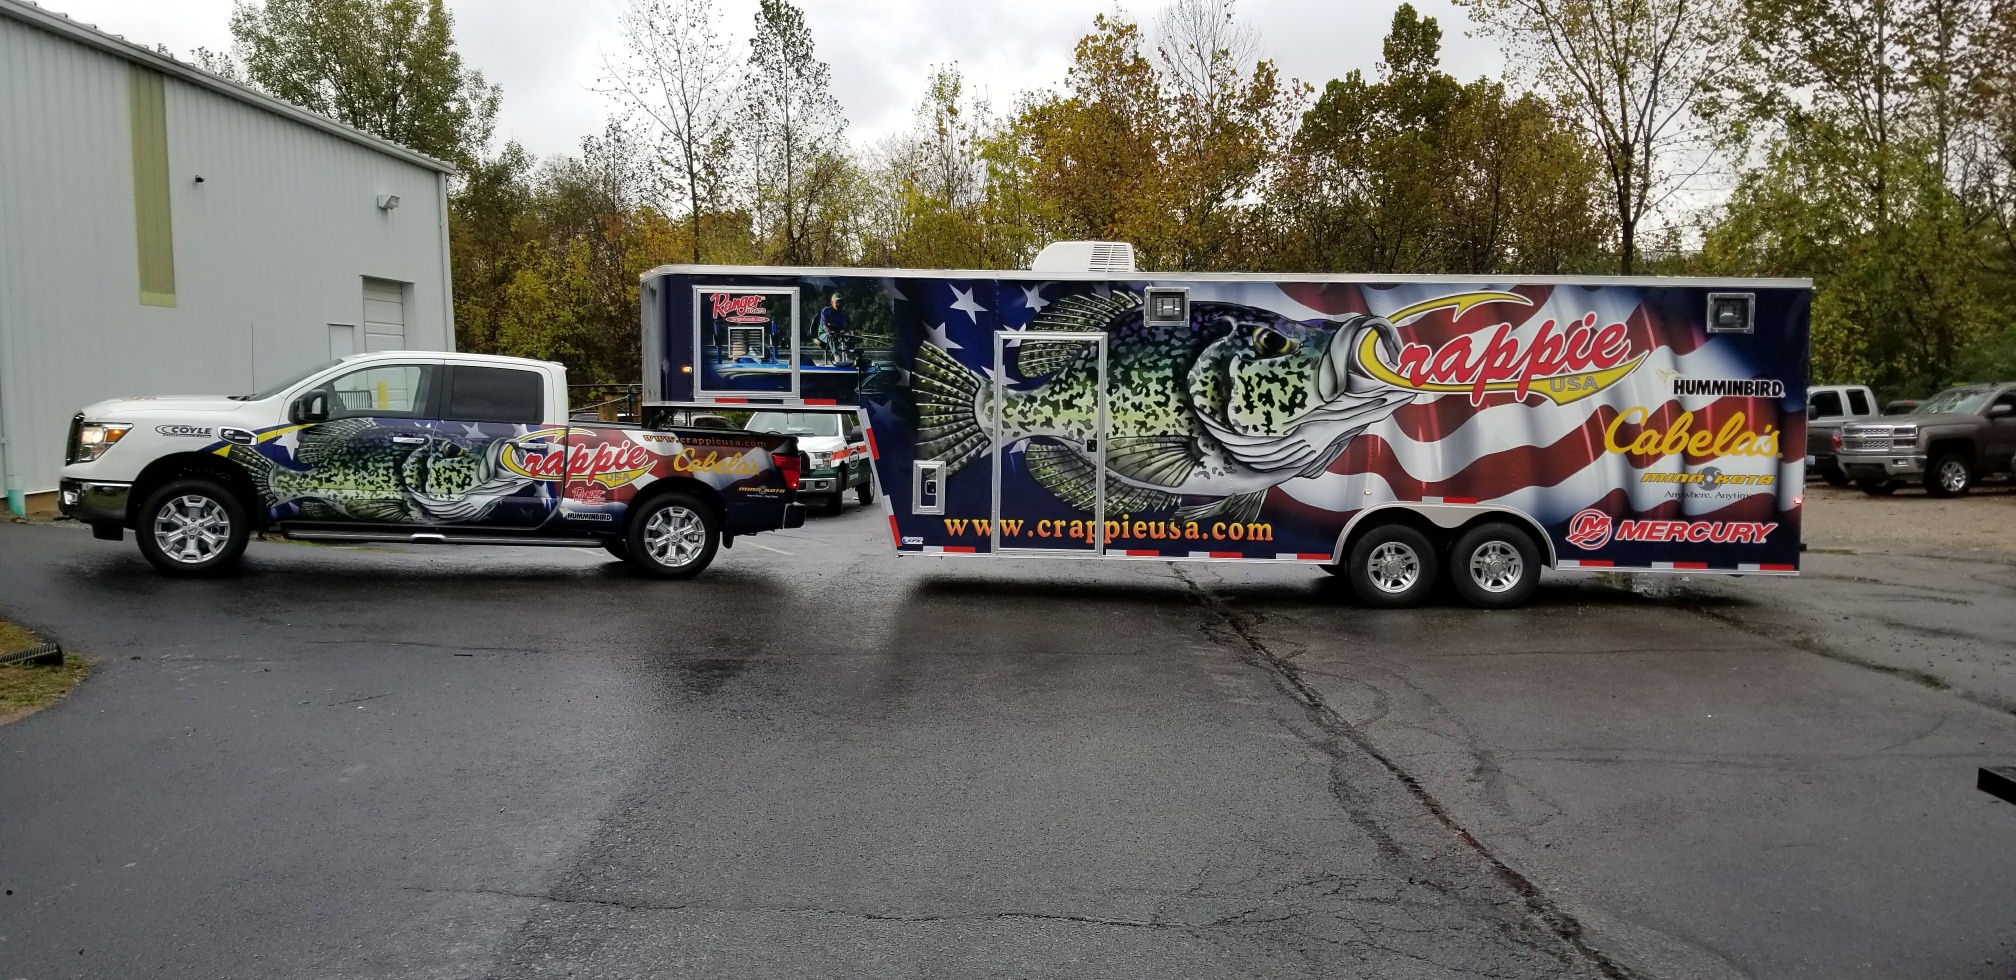 It took 596 square feet of film to create the graphics for the trailer and 190 for the truck. The job was printed on a Roland XR-640 Soljet Pro 4 on Avery Dennison MPI 1105 EZ RS with DOL 1060Z cast gloss laminate.  